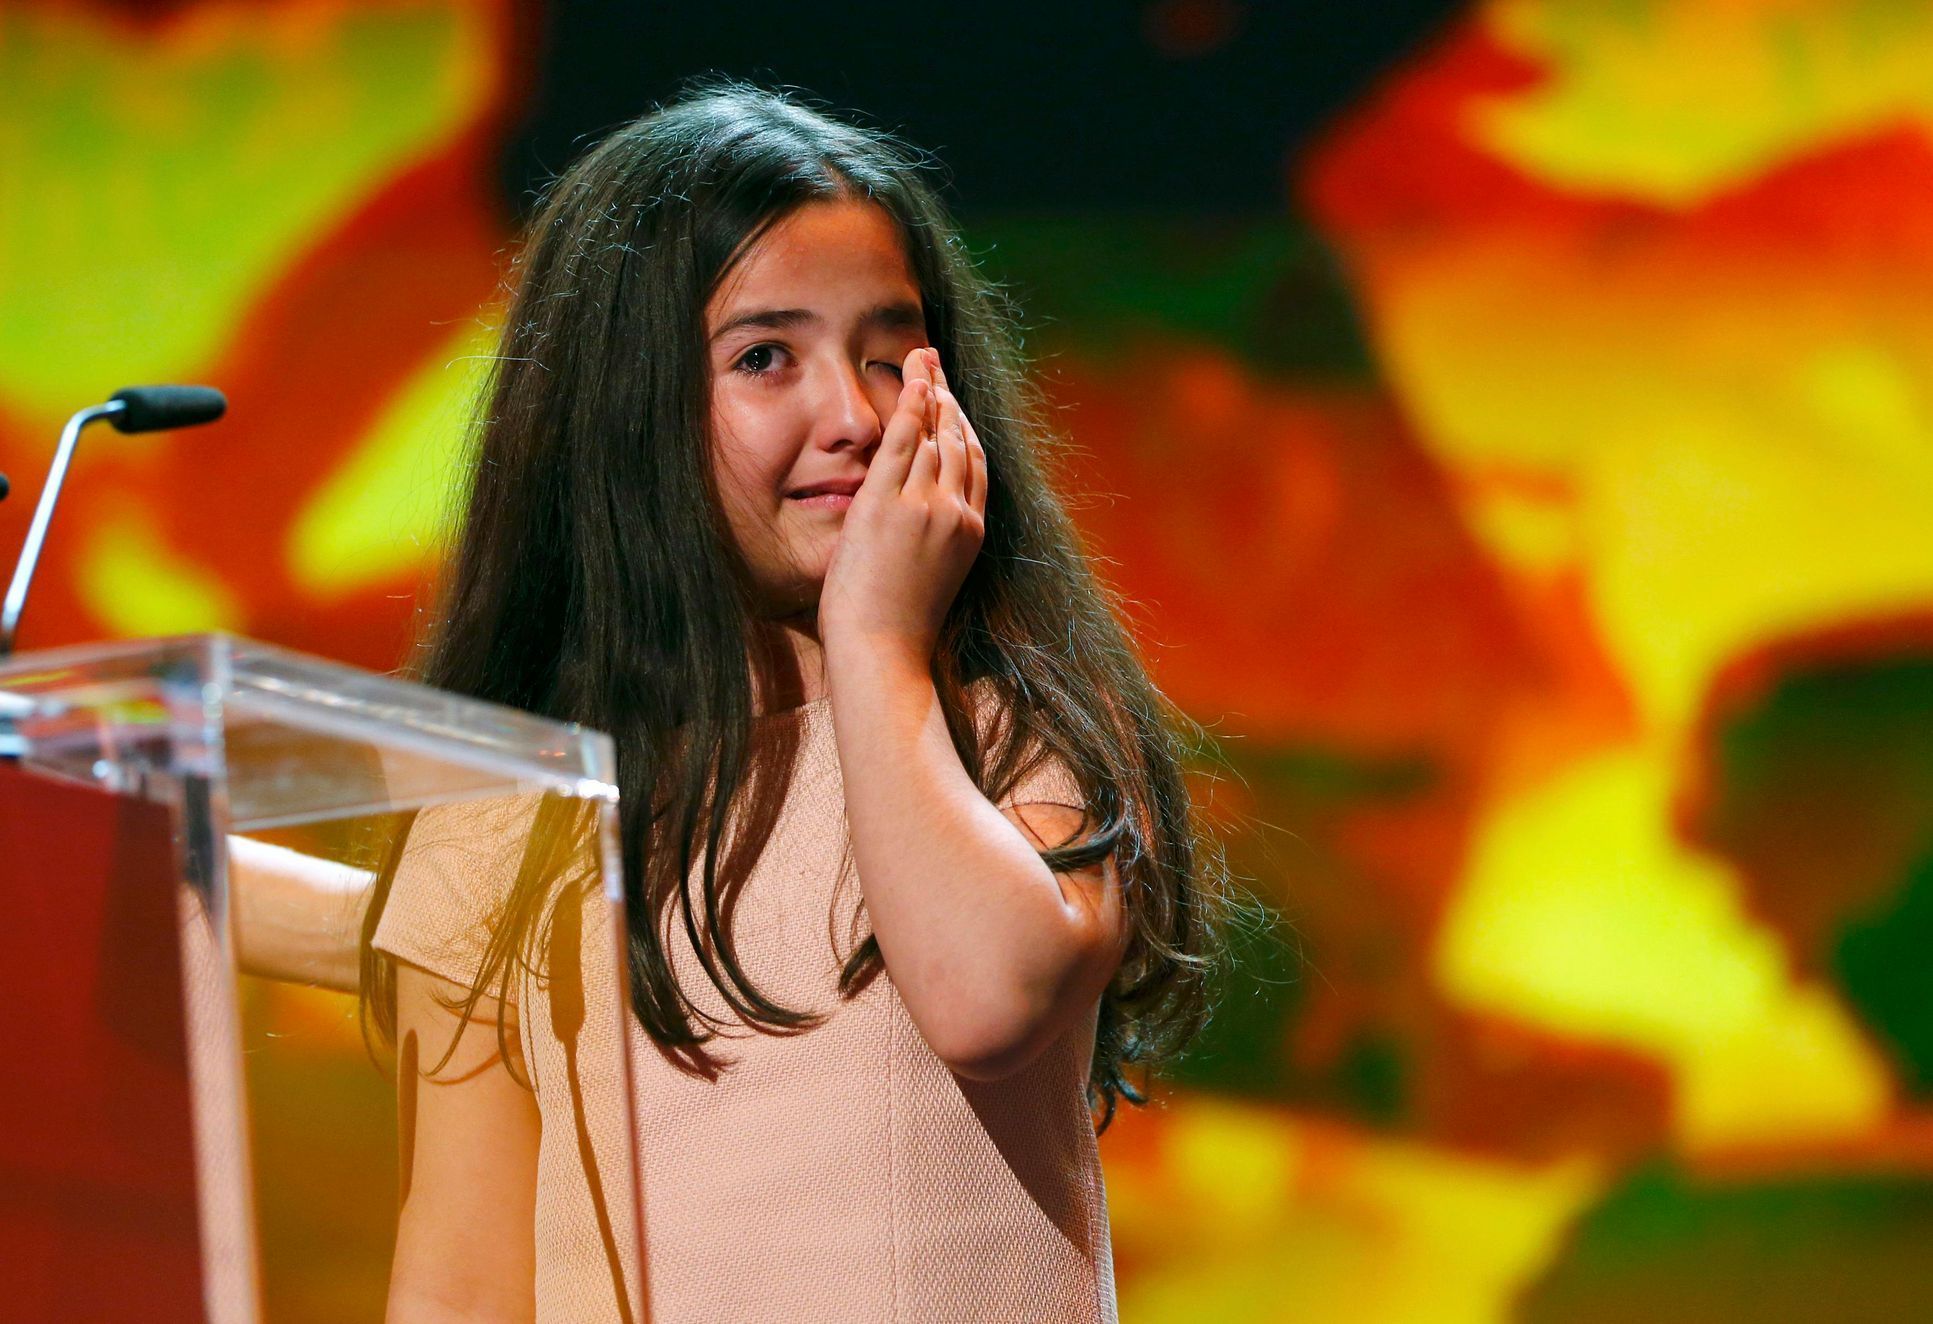 Saeidi niece of Iranian film director Panahi accepts the Golden Bear for Best Film on her uncle's behalf during awards ceremony at 65th Berlinale International Film Festival in Berlin